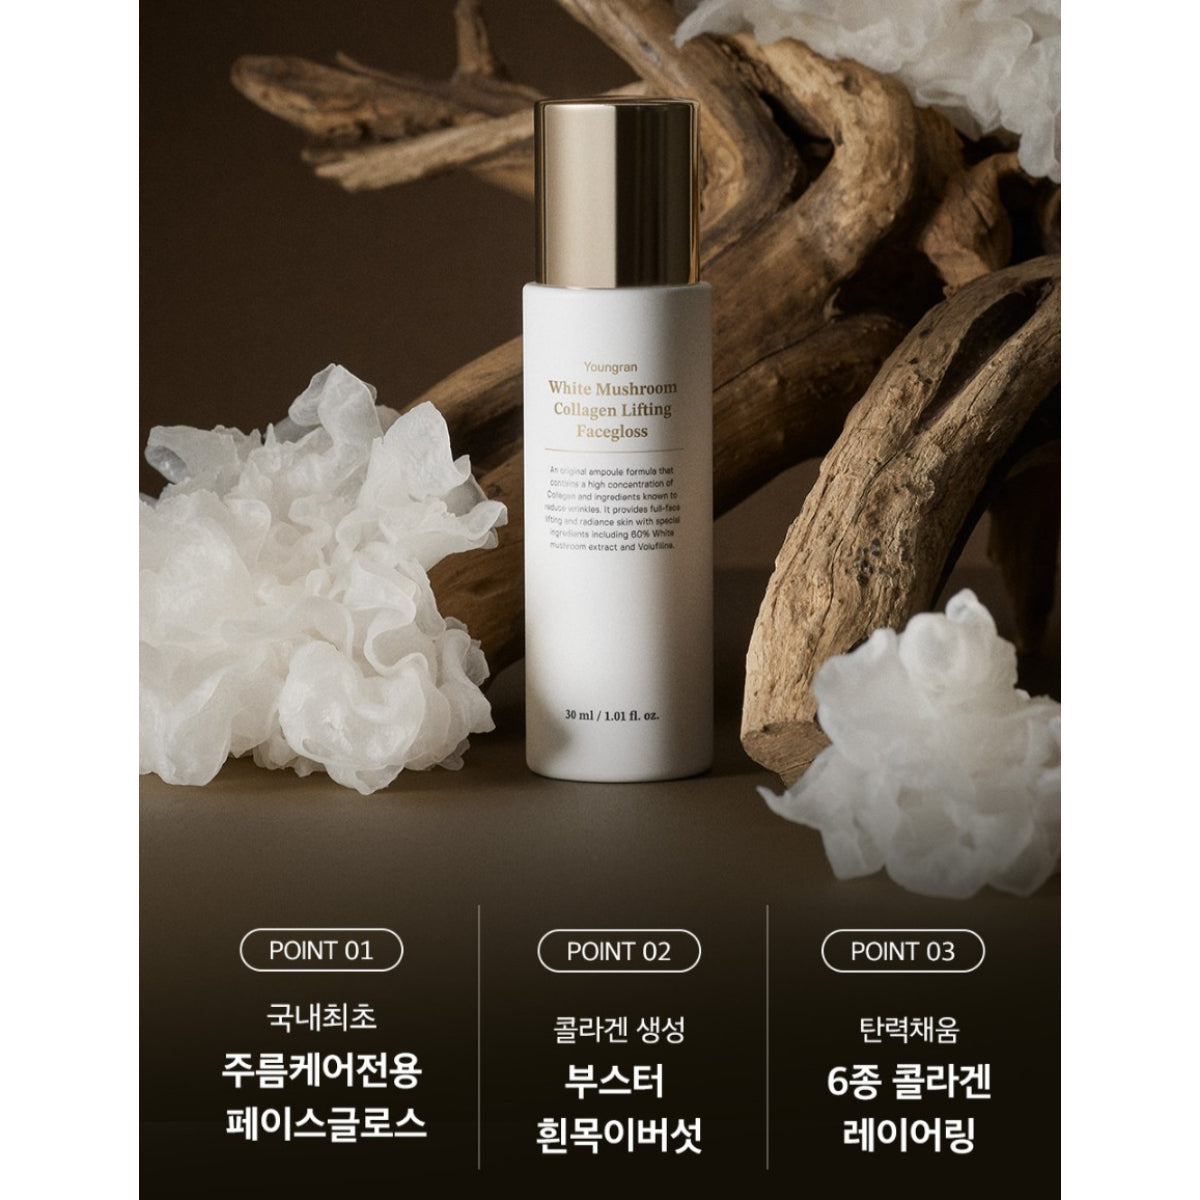 SUNGBOON EDITOR Youngran White Mushroom Collagen Facegloss 30ml/bottle Whitening Wrinkle Care Anti-aging Lifting Firming Pore Care / from Seoul, Korea